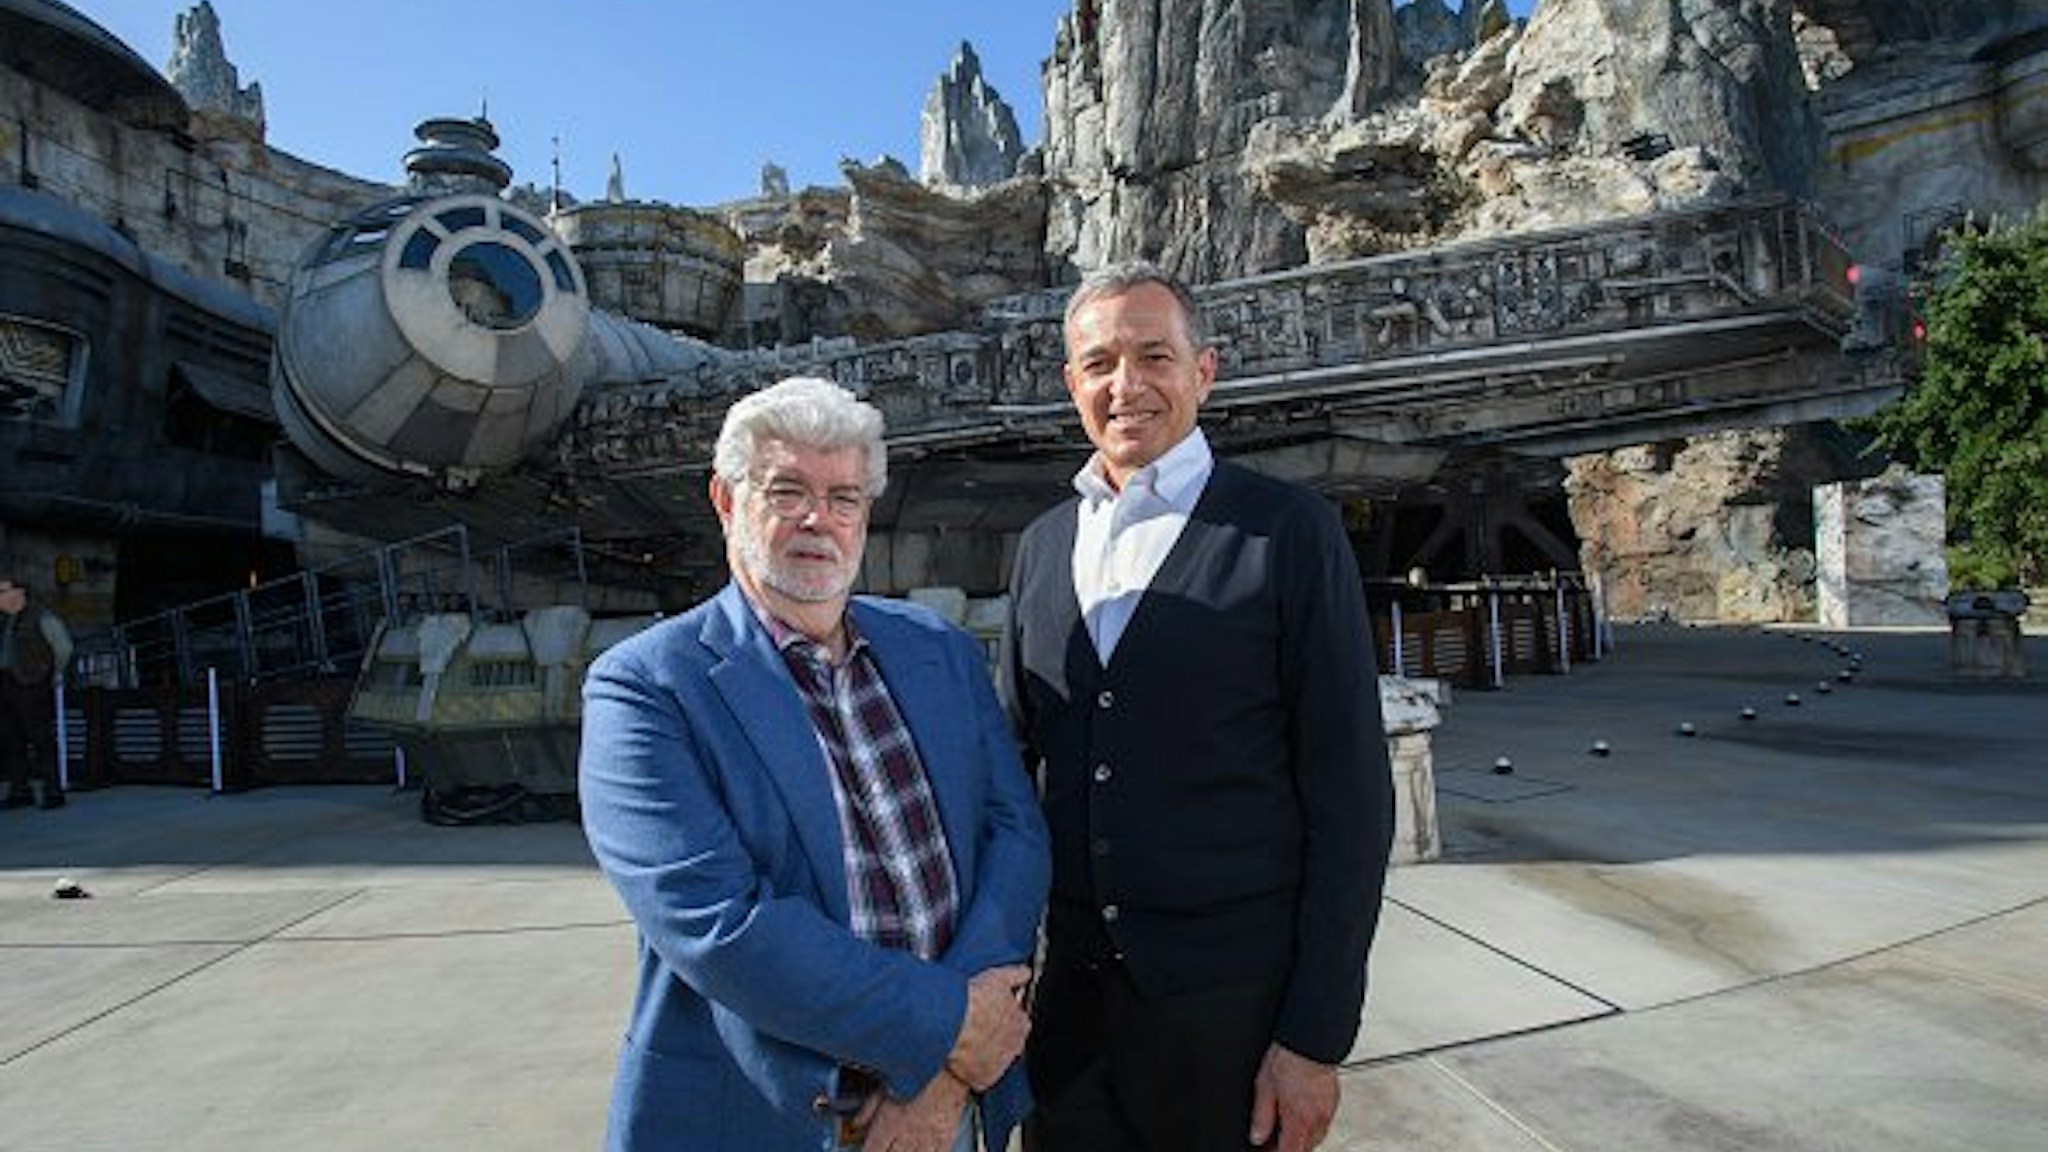 In this handout photo provided by Disneyland Resort, Walt Disney Company Chairman and CEO Bob Iger